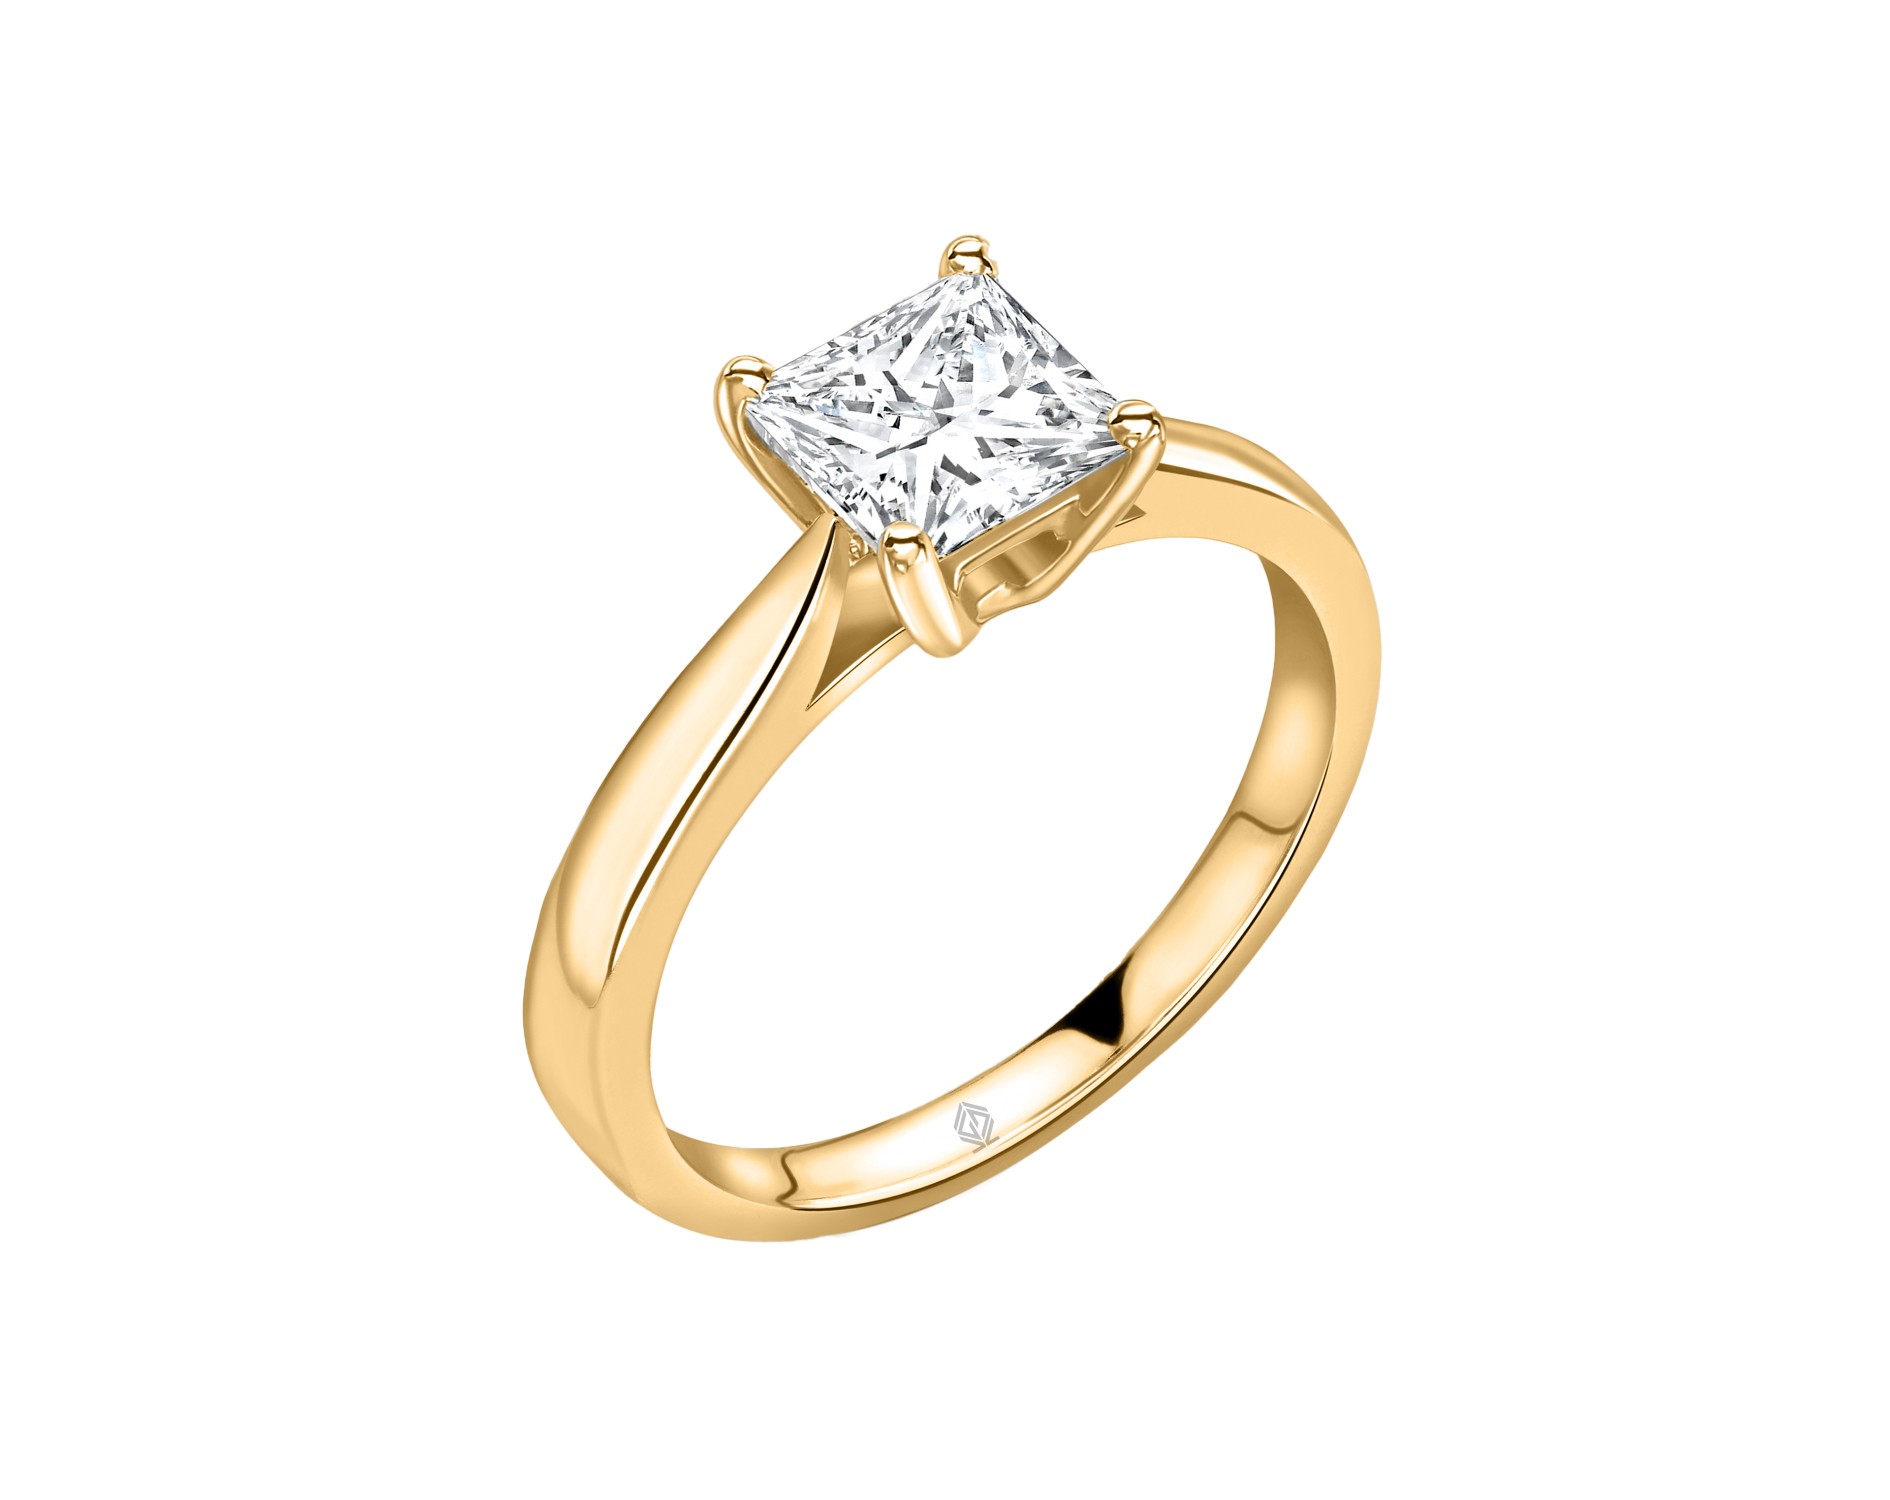 18K YELLOW GOLD GOLD 4 PRONGS SOLITAIRE PRINCESS CUT DIAMOND ENGAGEMENT RING